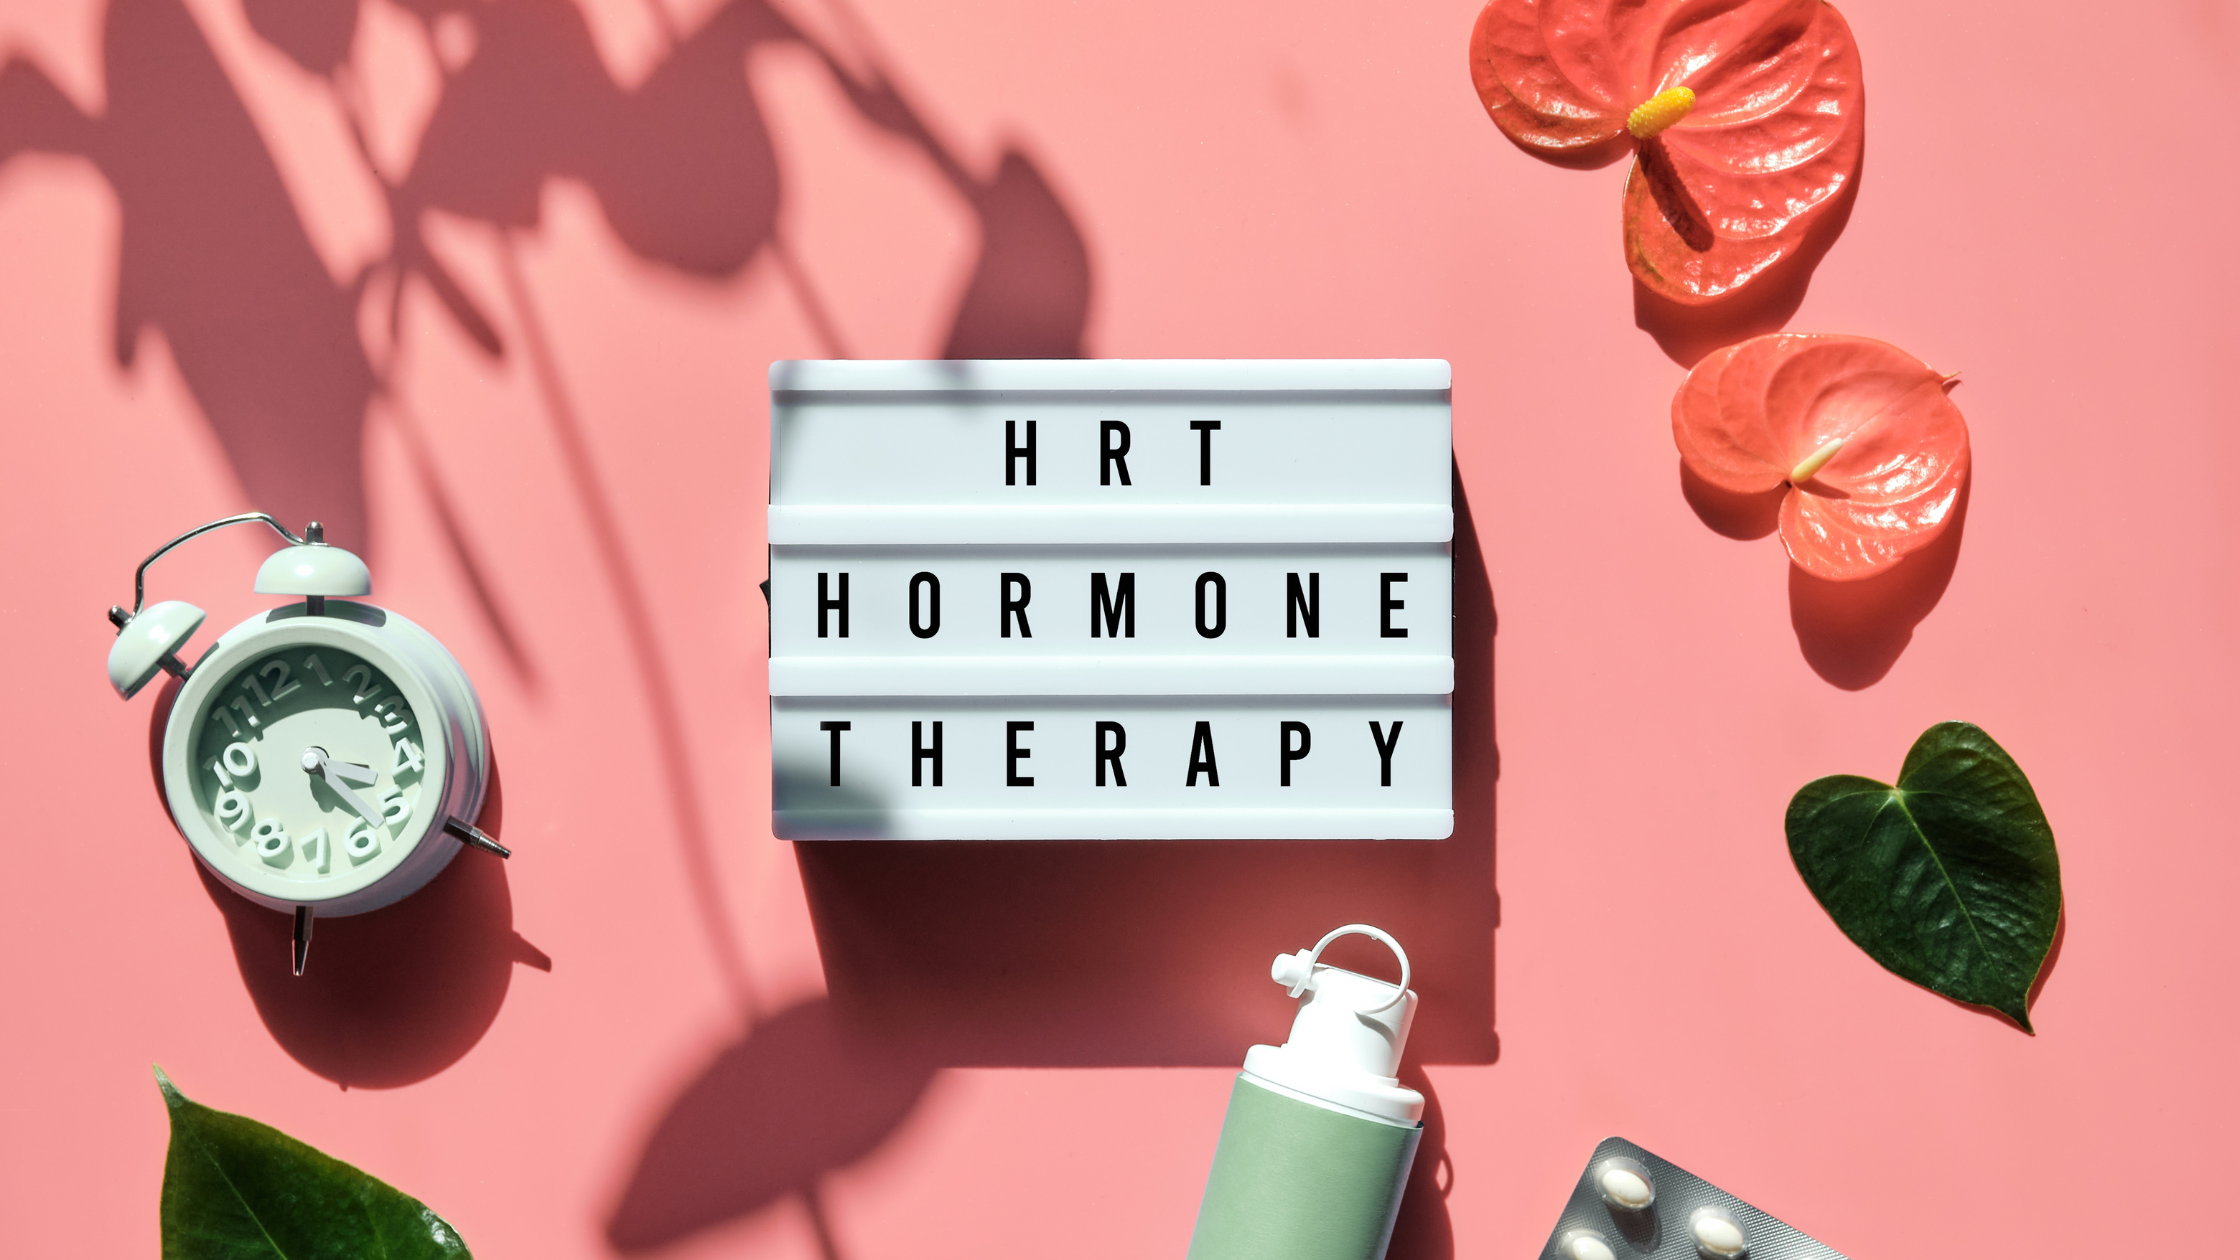 Hormone Replacement Therapy is one option for easing menopause symptoms